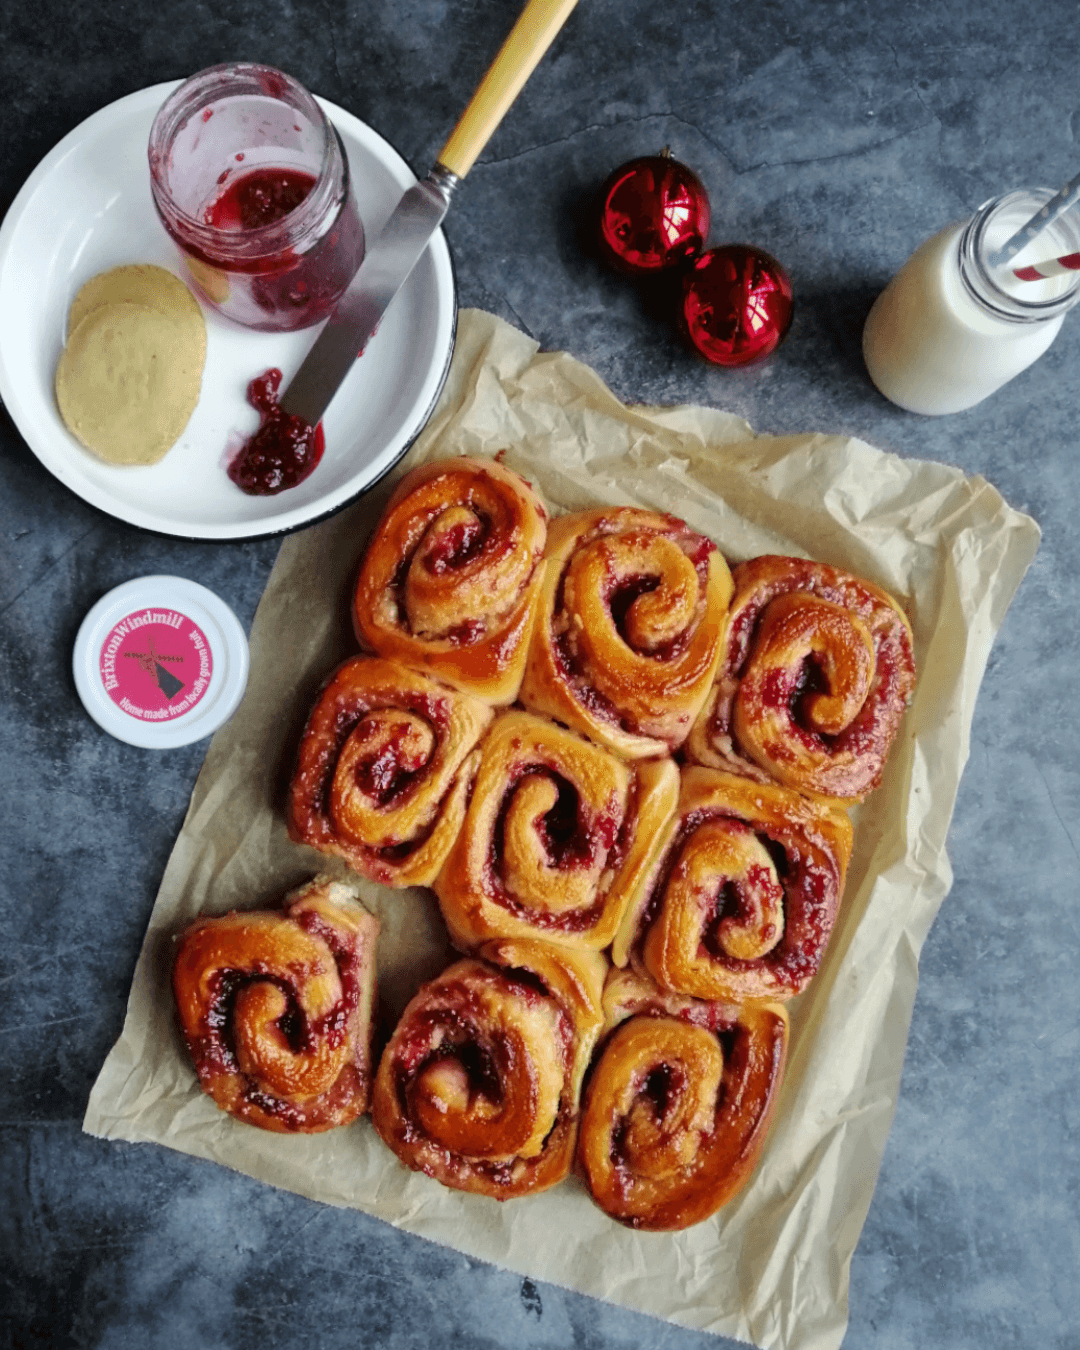 Jam and marzipan sticky buns out of the oven on a baking parchment. Copyright The Italian bkr